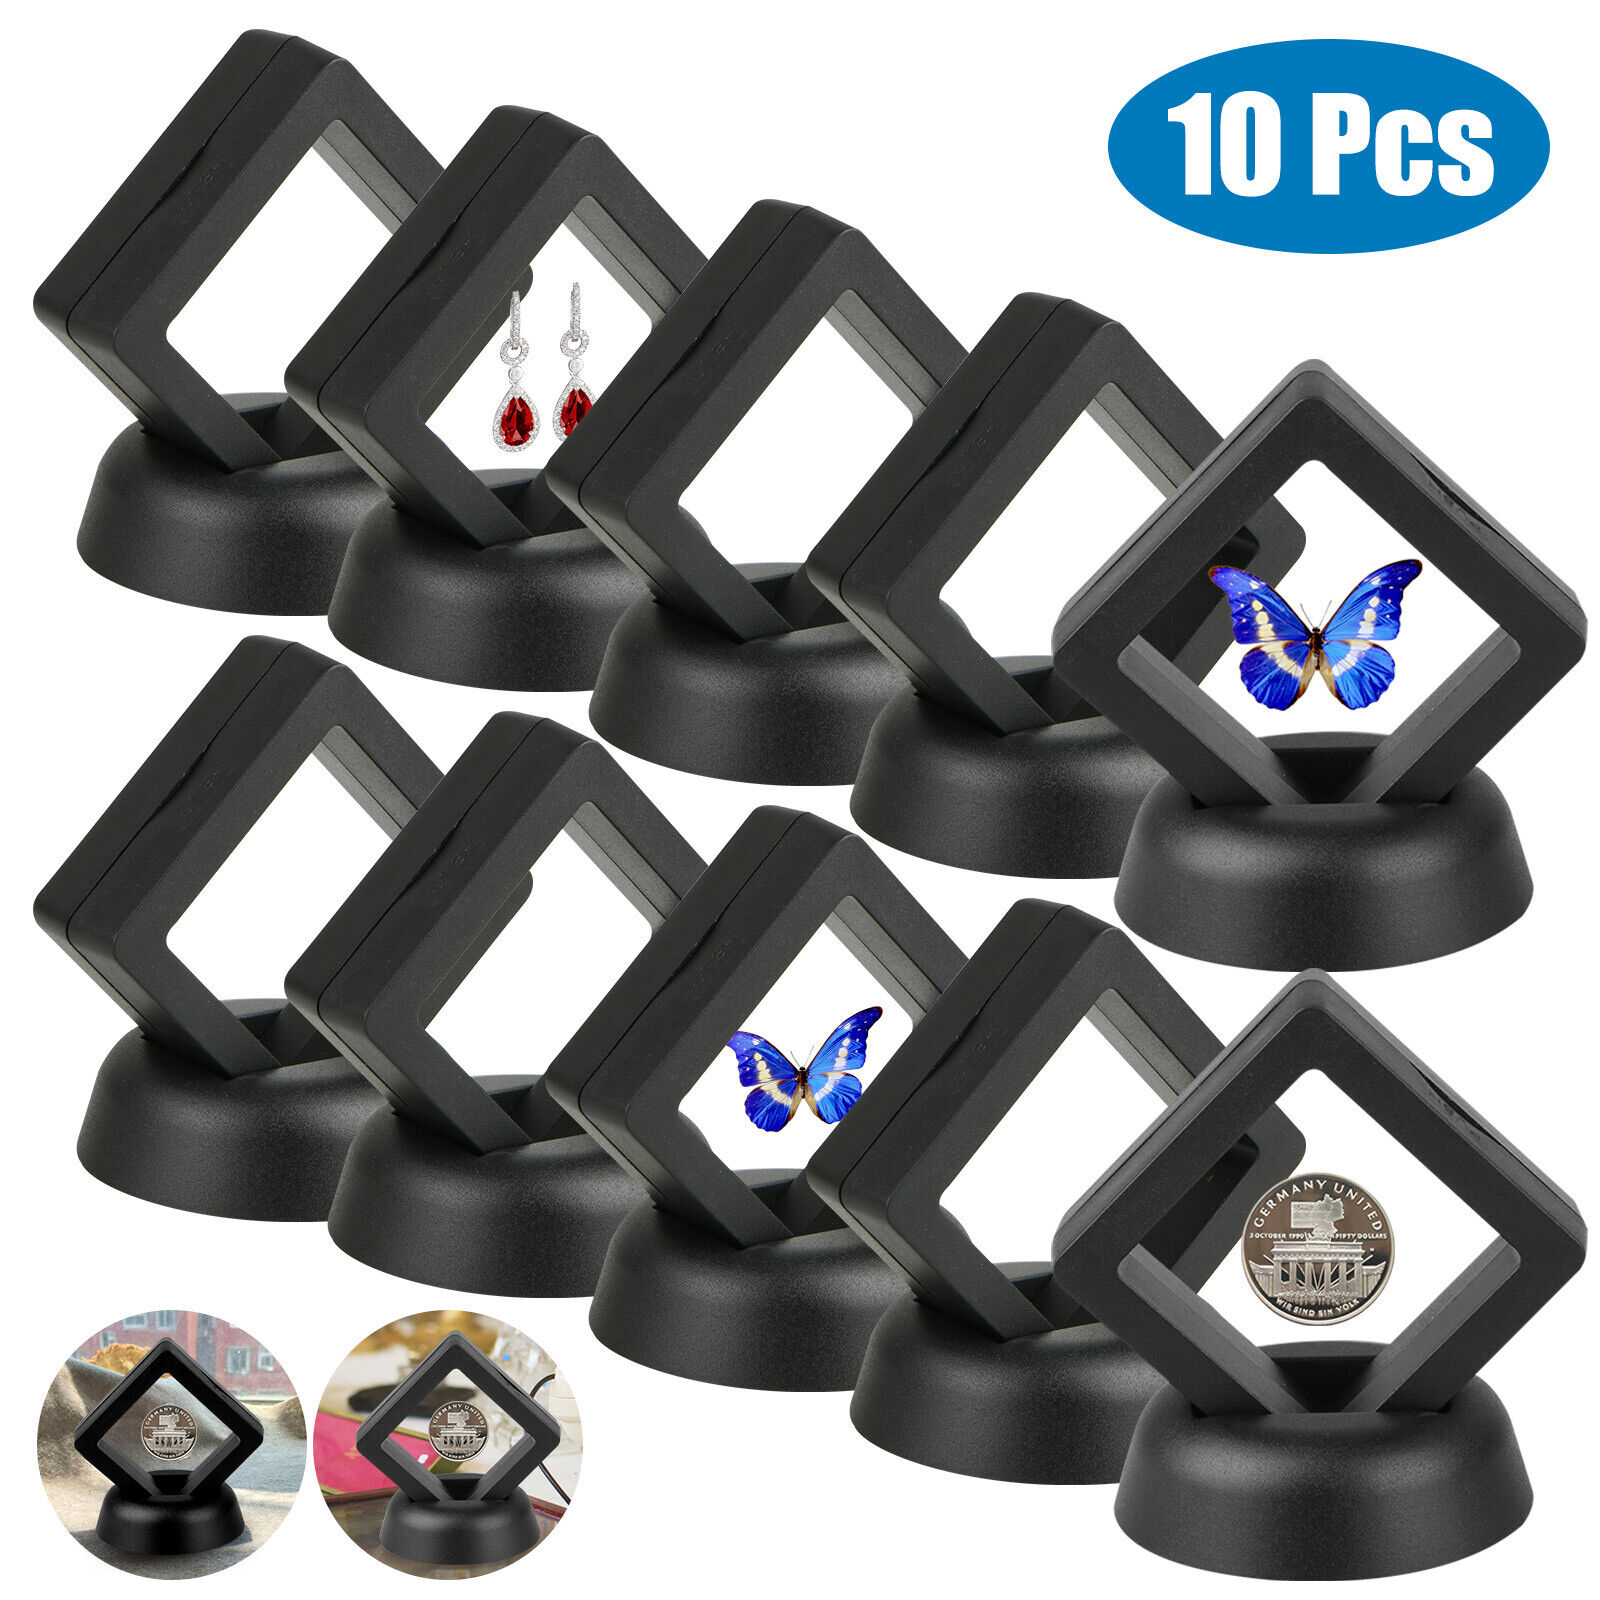 10Pcs 3D Floating Coin Display Frame Stand Holder Case Box For Jewelry Challenge